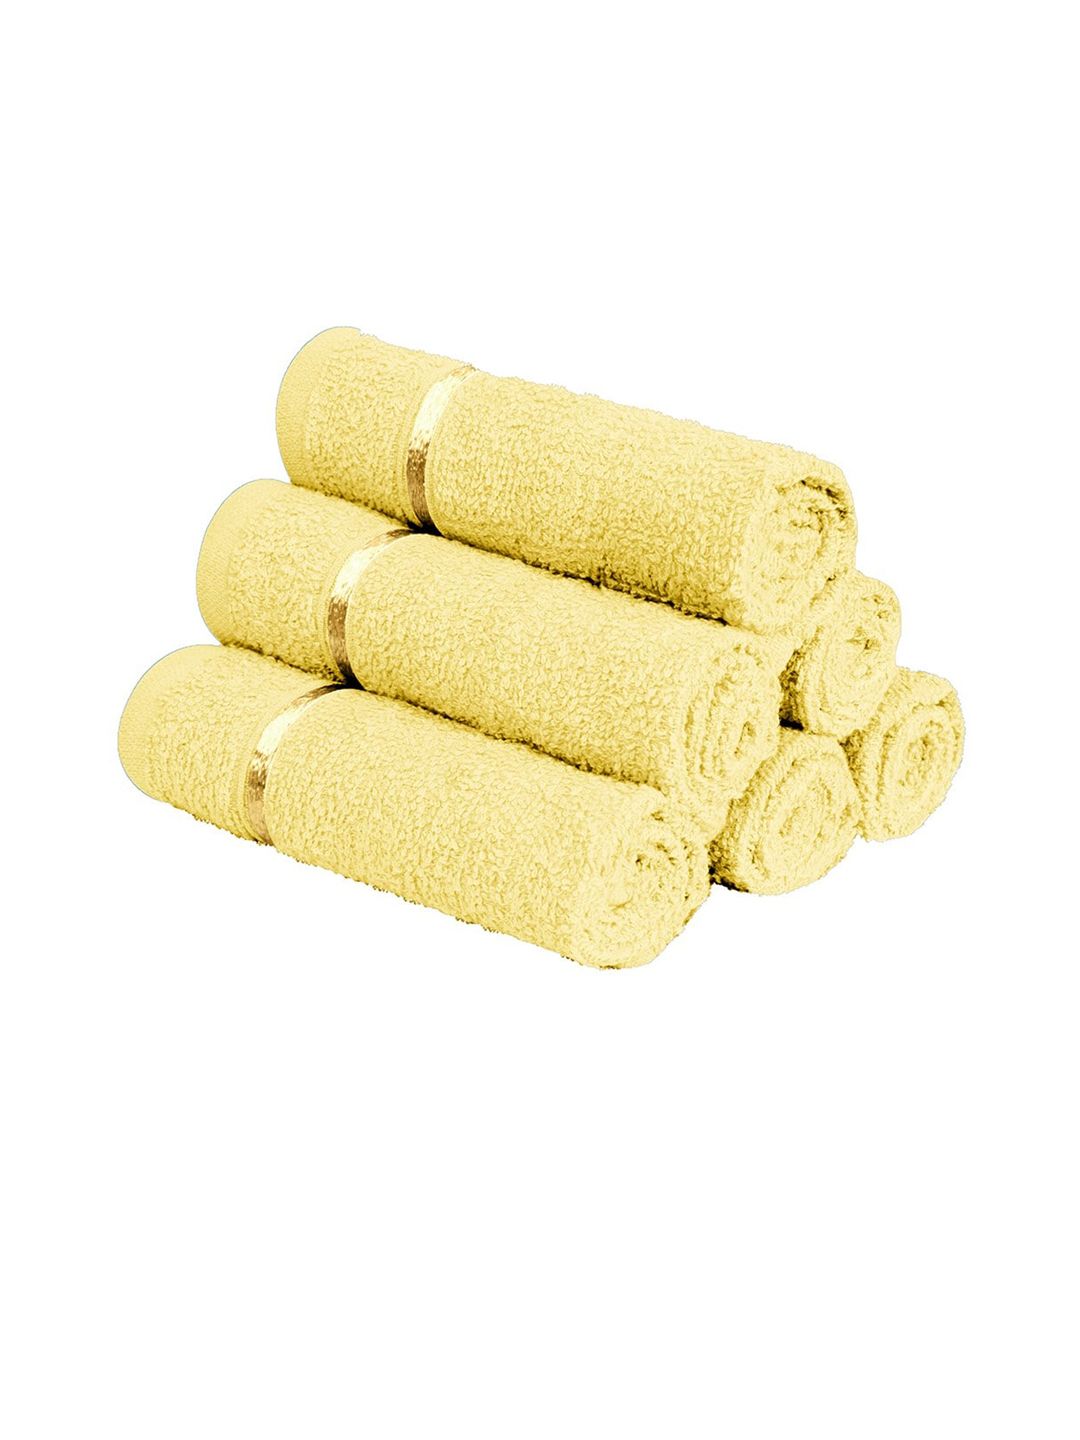 Story@home Set Of 6 Solid 450 GSM Pure Cotton Face Towels Price in India